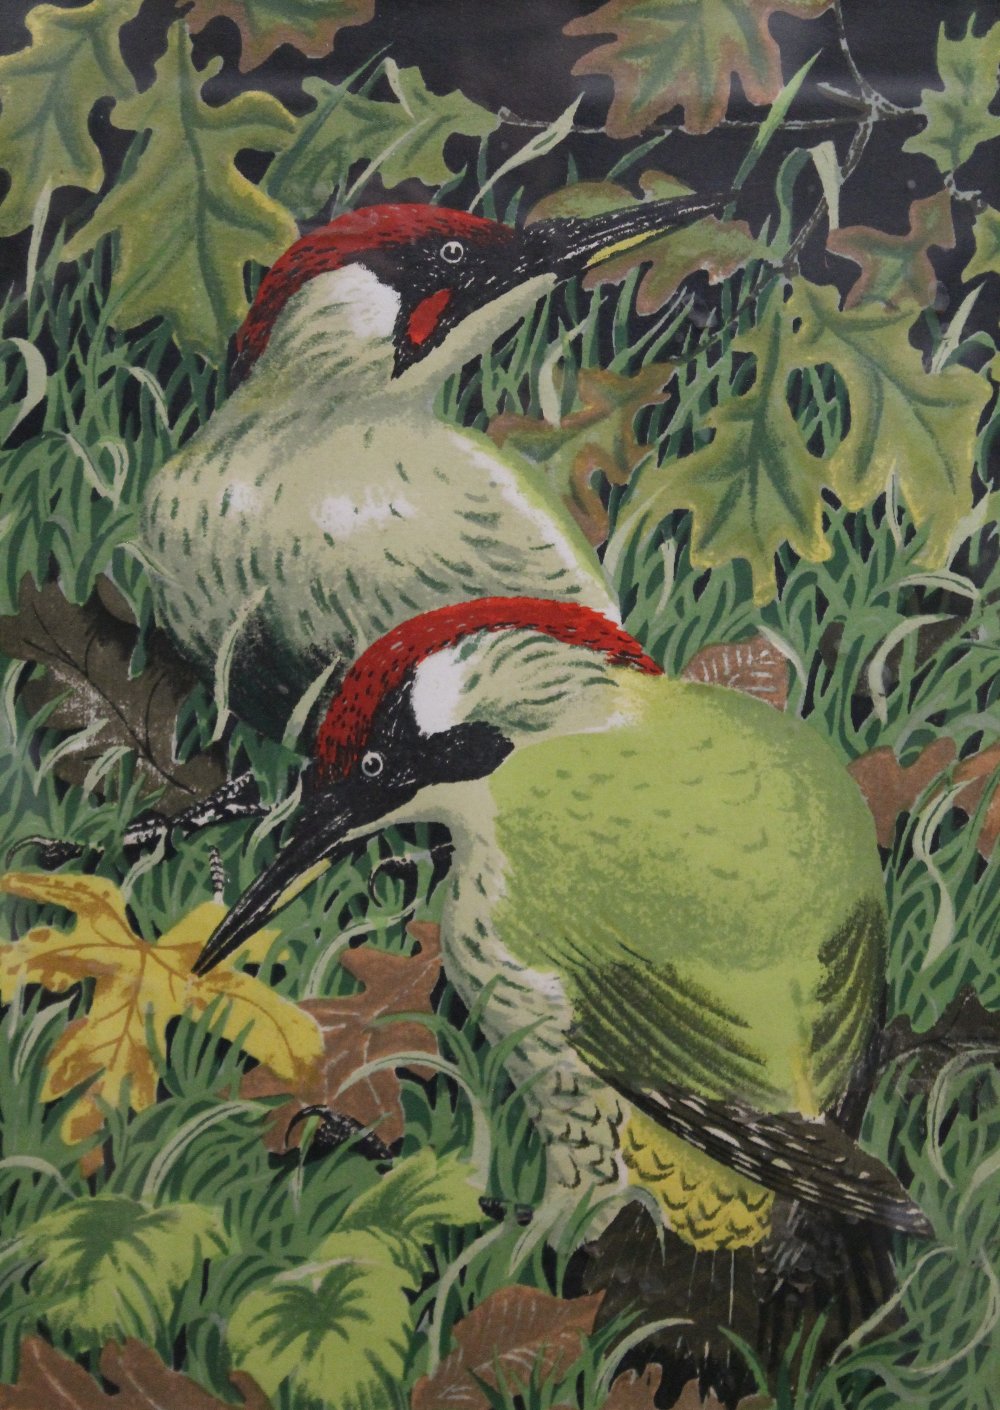 JOHN TENNENT, Green Woodpeckers, limited edition print, numbered 8/65, signed and dated 1970,